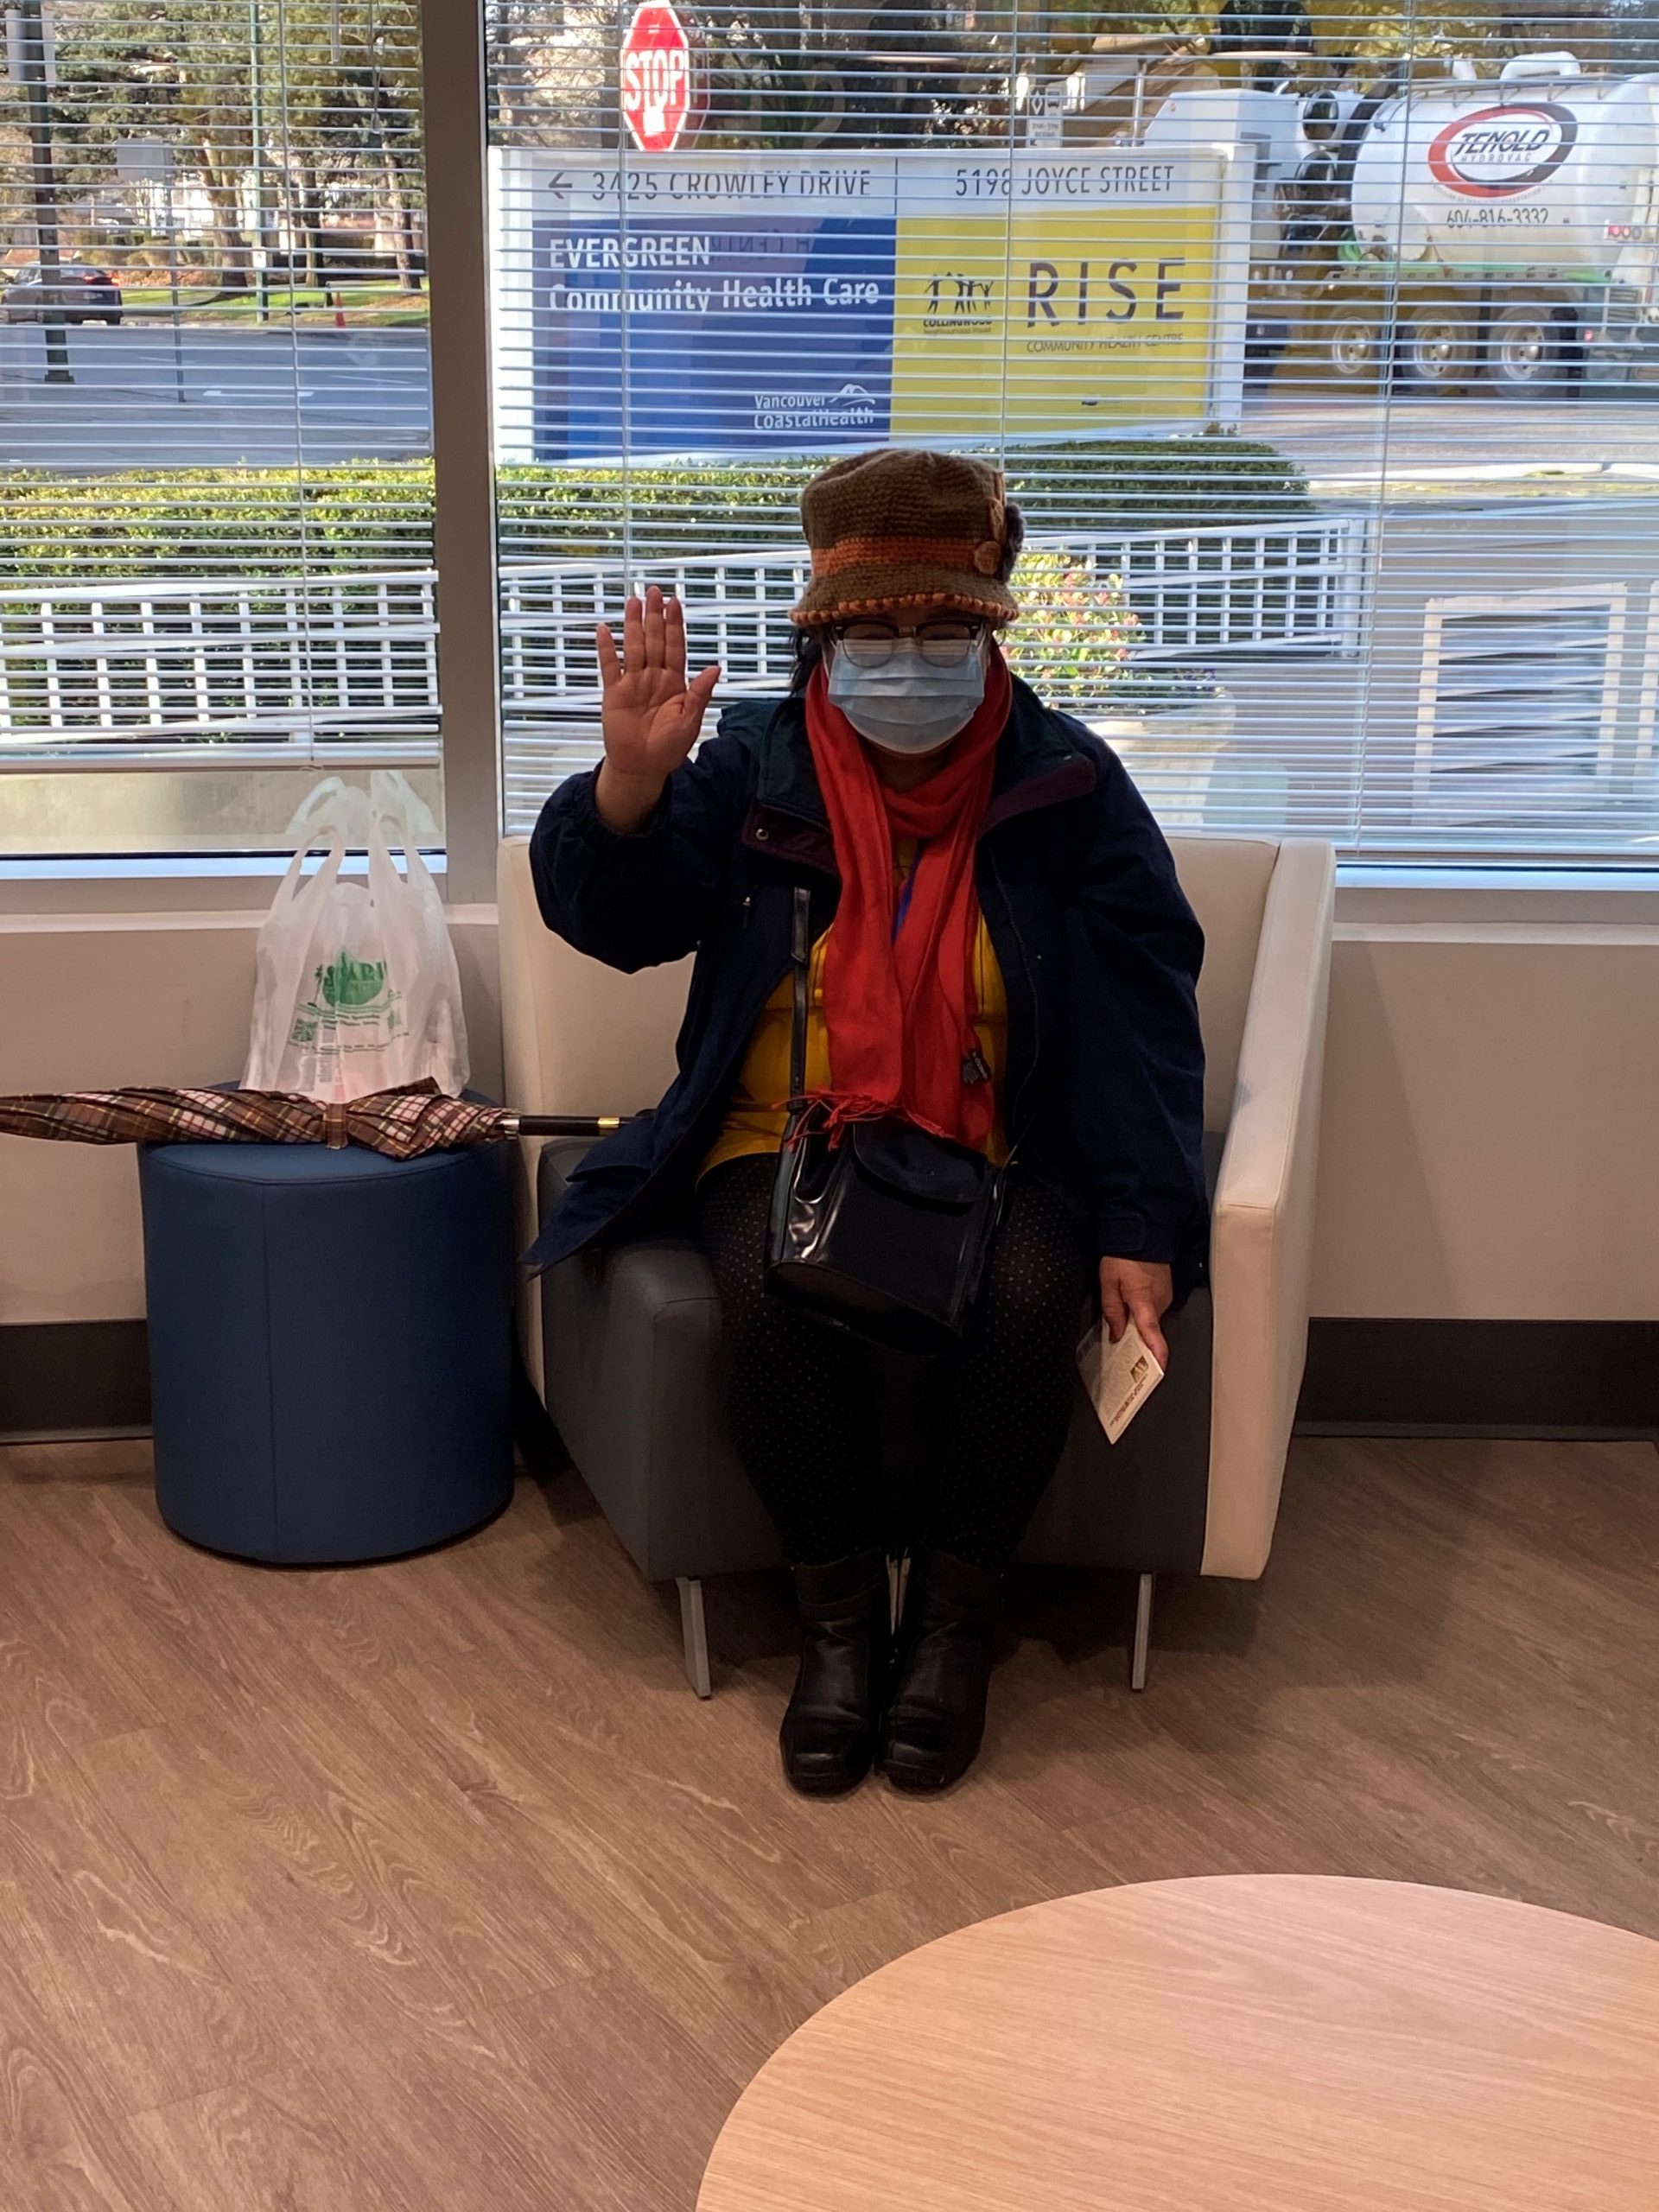 An older woman sits on a chair in a lobby, waving towards the camera. She is wearing a dark jacket, red scarf, toque, and face mask.